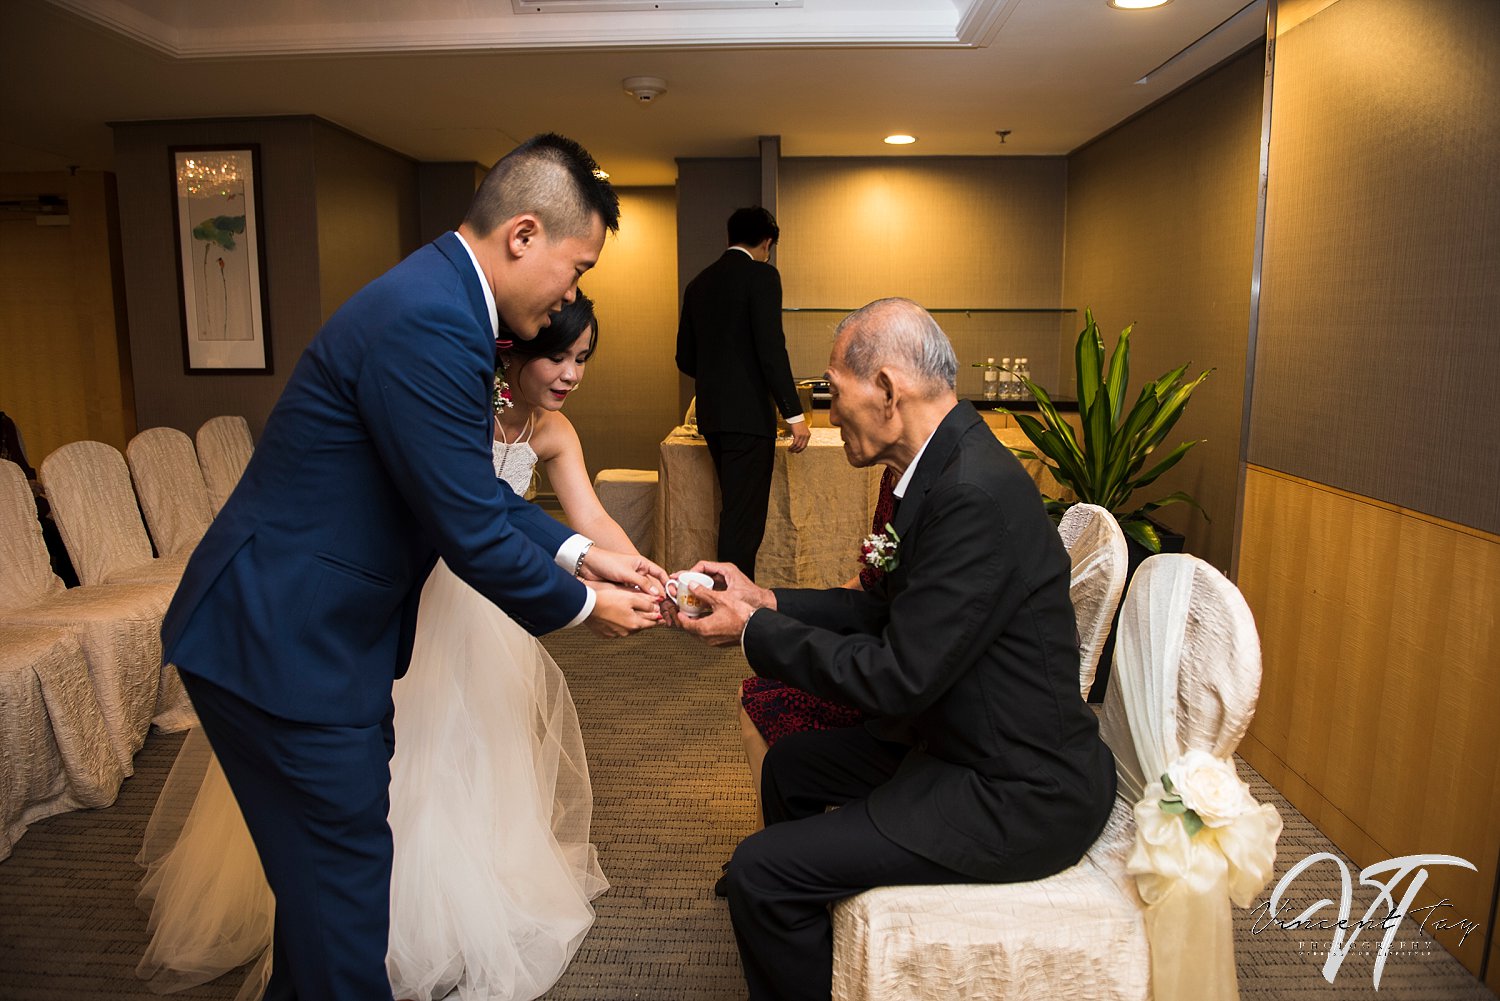 Actual Day Wedding Photography Singapore